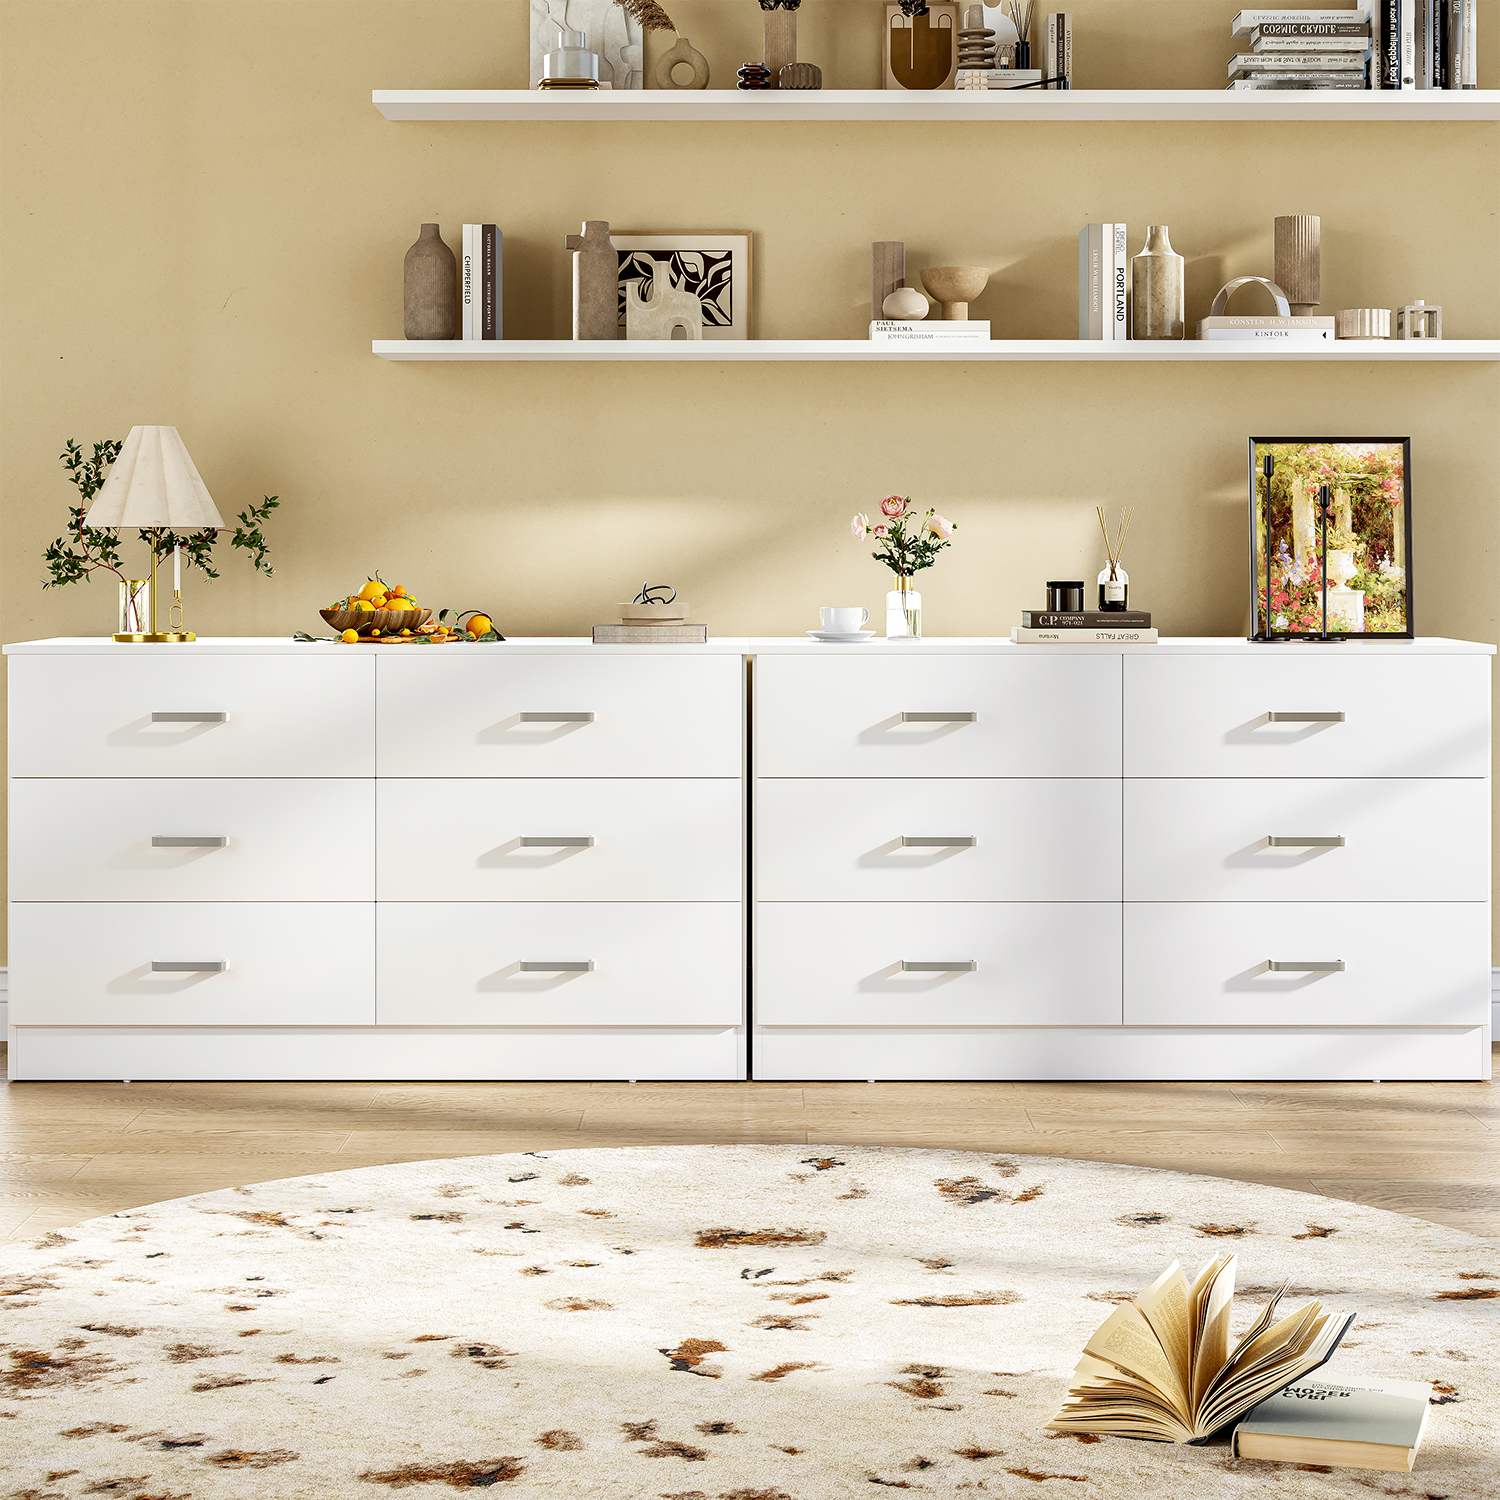 Winkalon 6 Drawer White Double Dresser, Wood Storage Cabinet with Easy Pull Out Handles for Living Room,Chest of Drawers for Bedroom - image 5 of 11